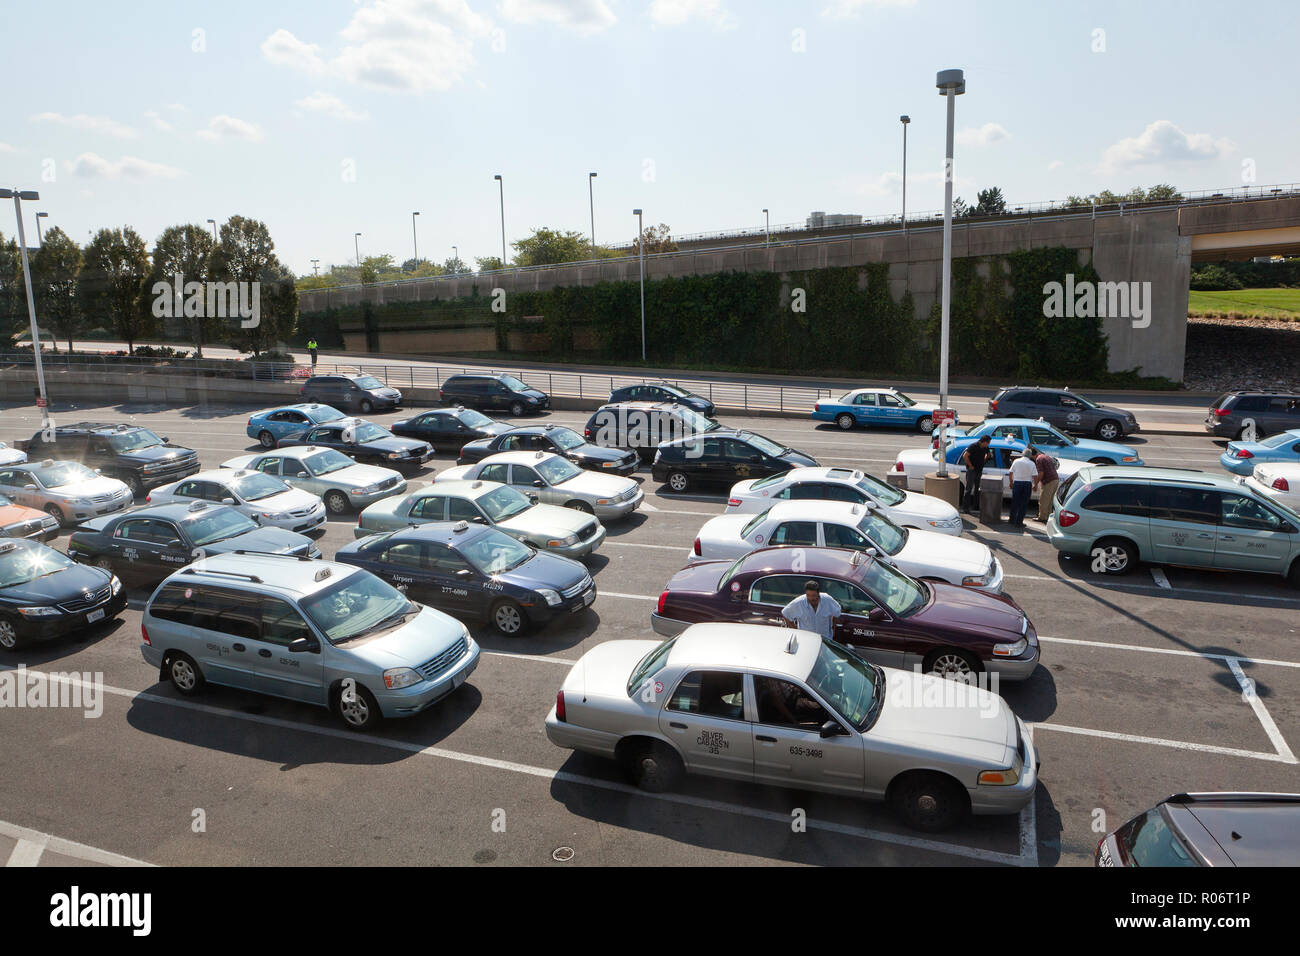 Parked taxis at airport waiting area - USA Stock Photo